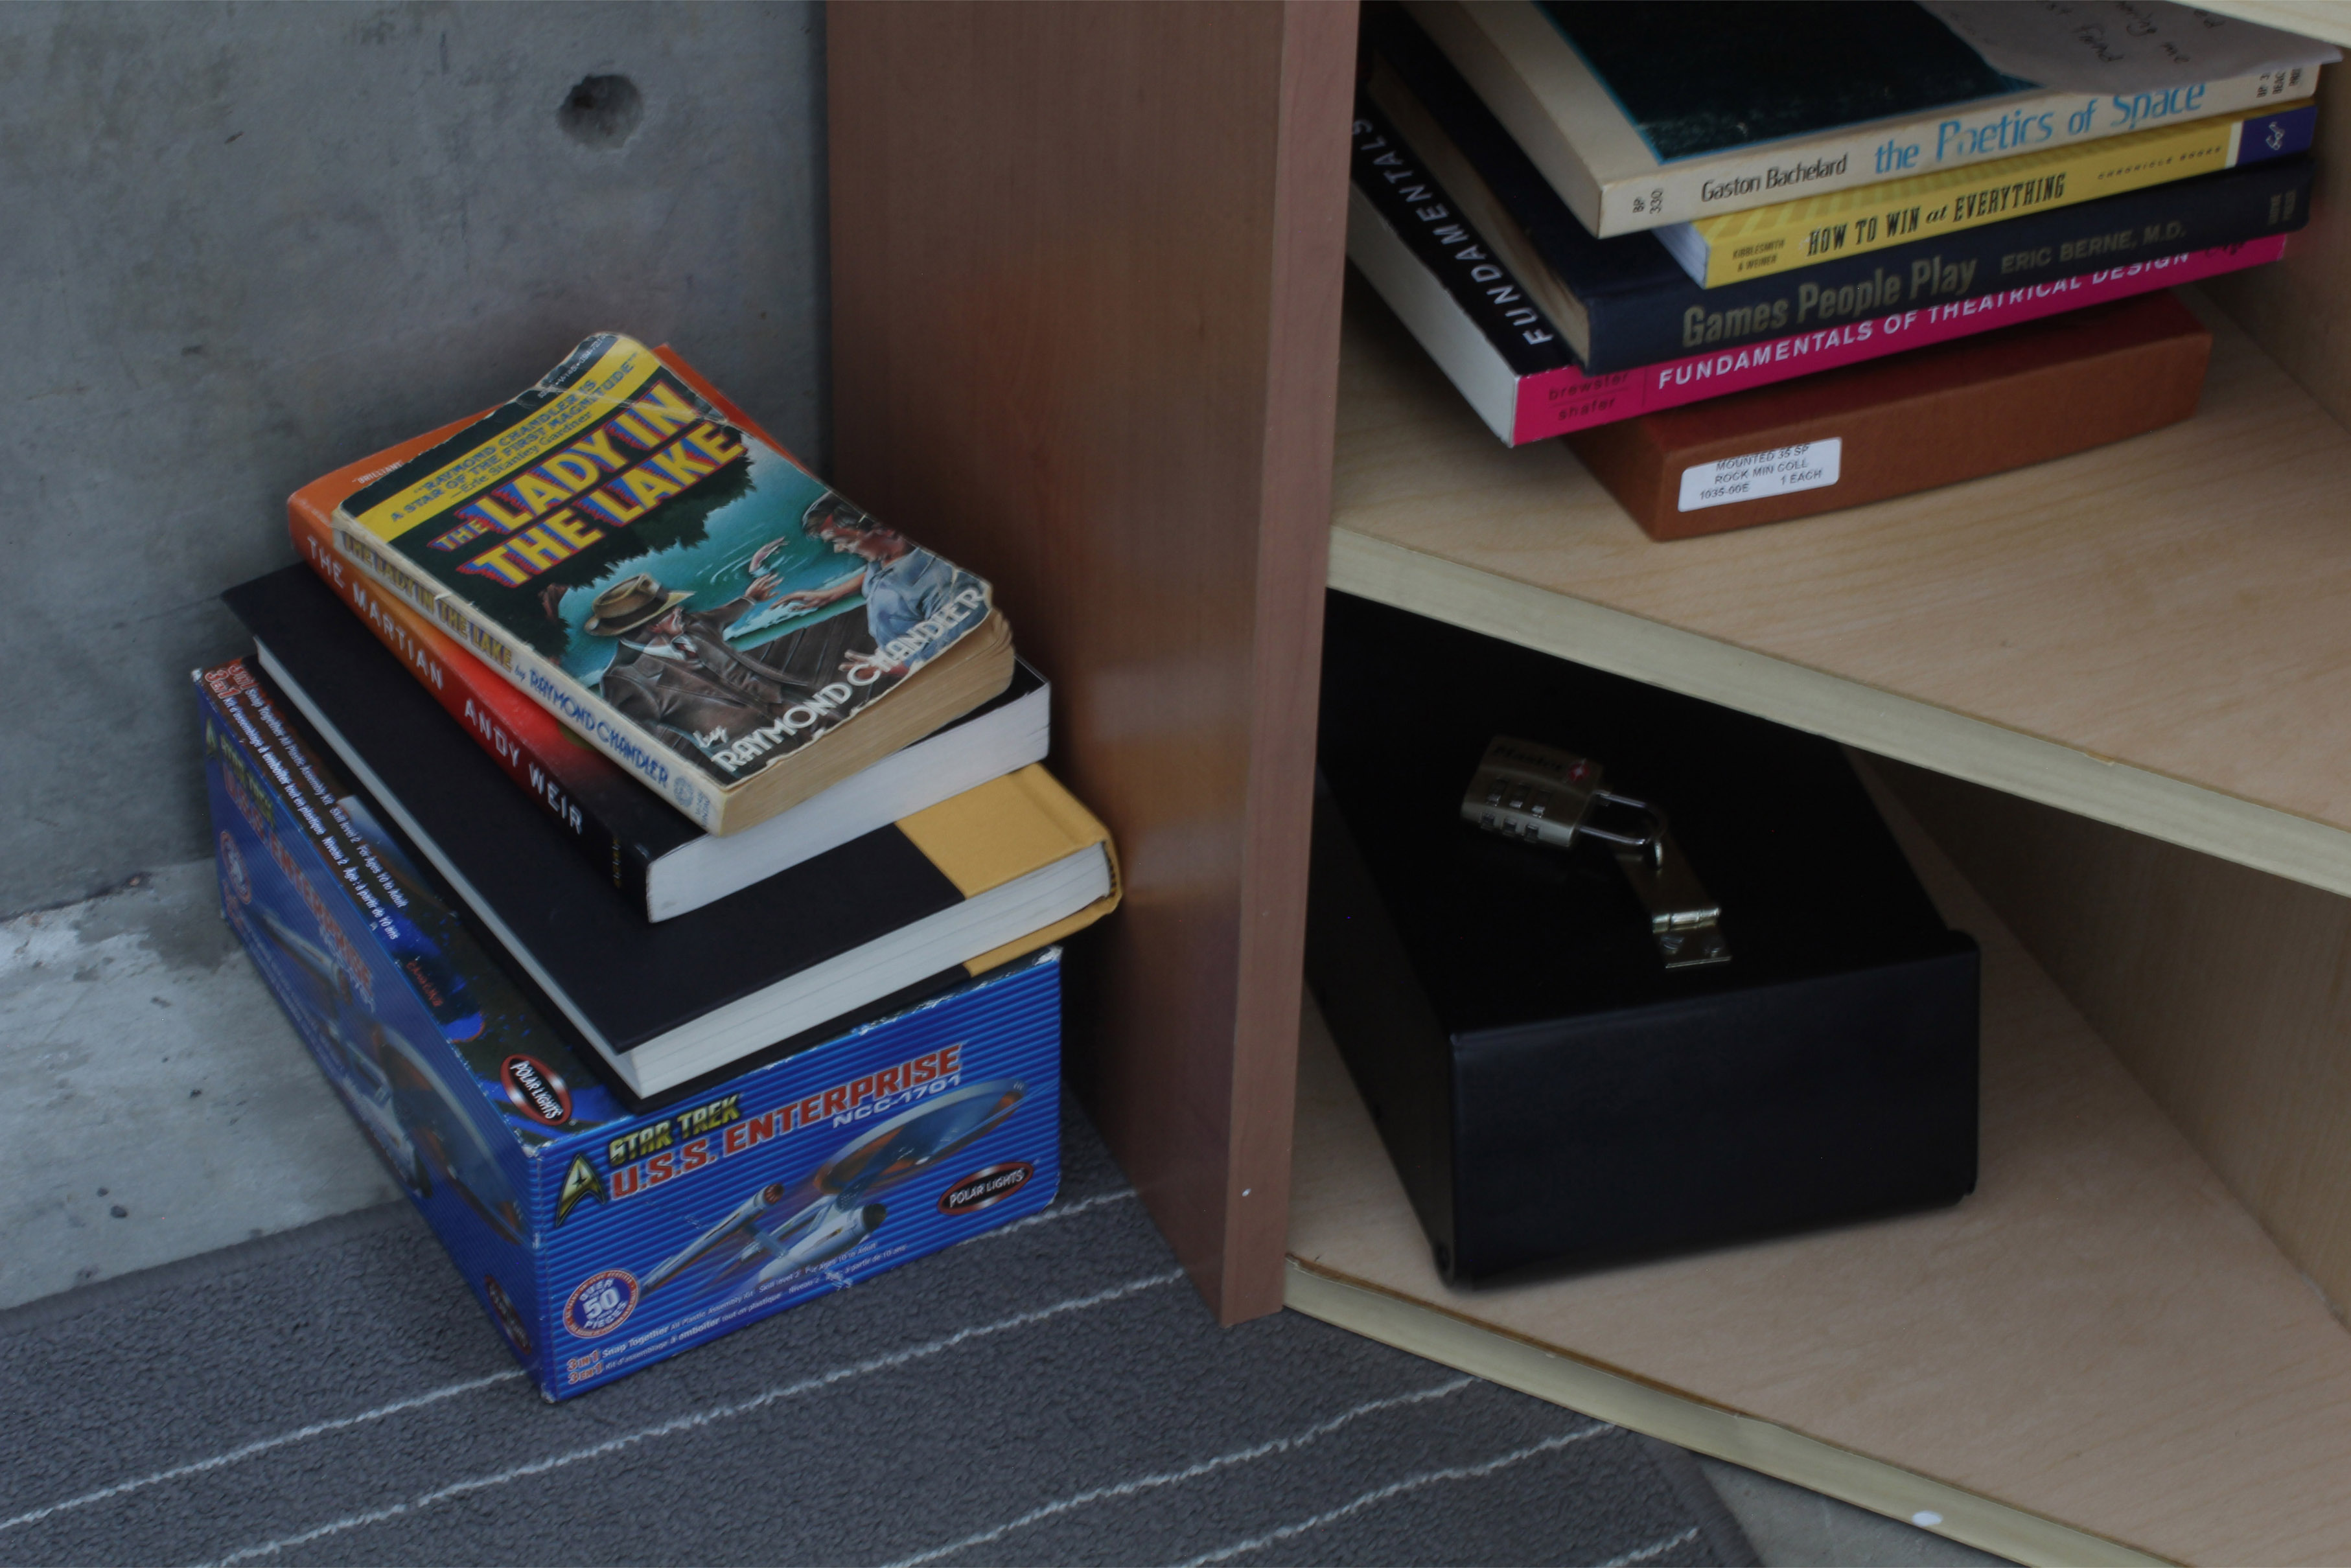 Bottom-half of a bookshelf. Next to it on the floor is a stack of books and a box of a model Star Trek spaceship. On the shelf are books about space, games and theatrical design. On the bottom shelf is a lockbox